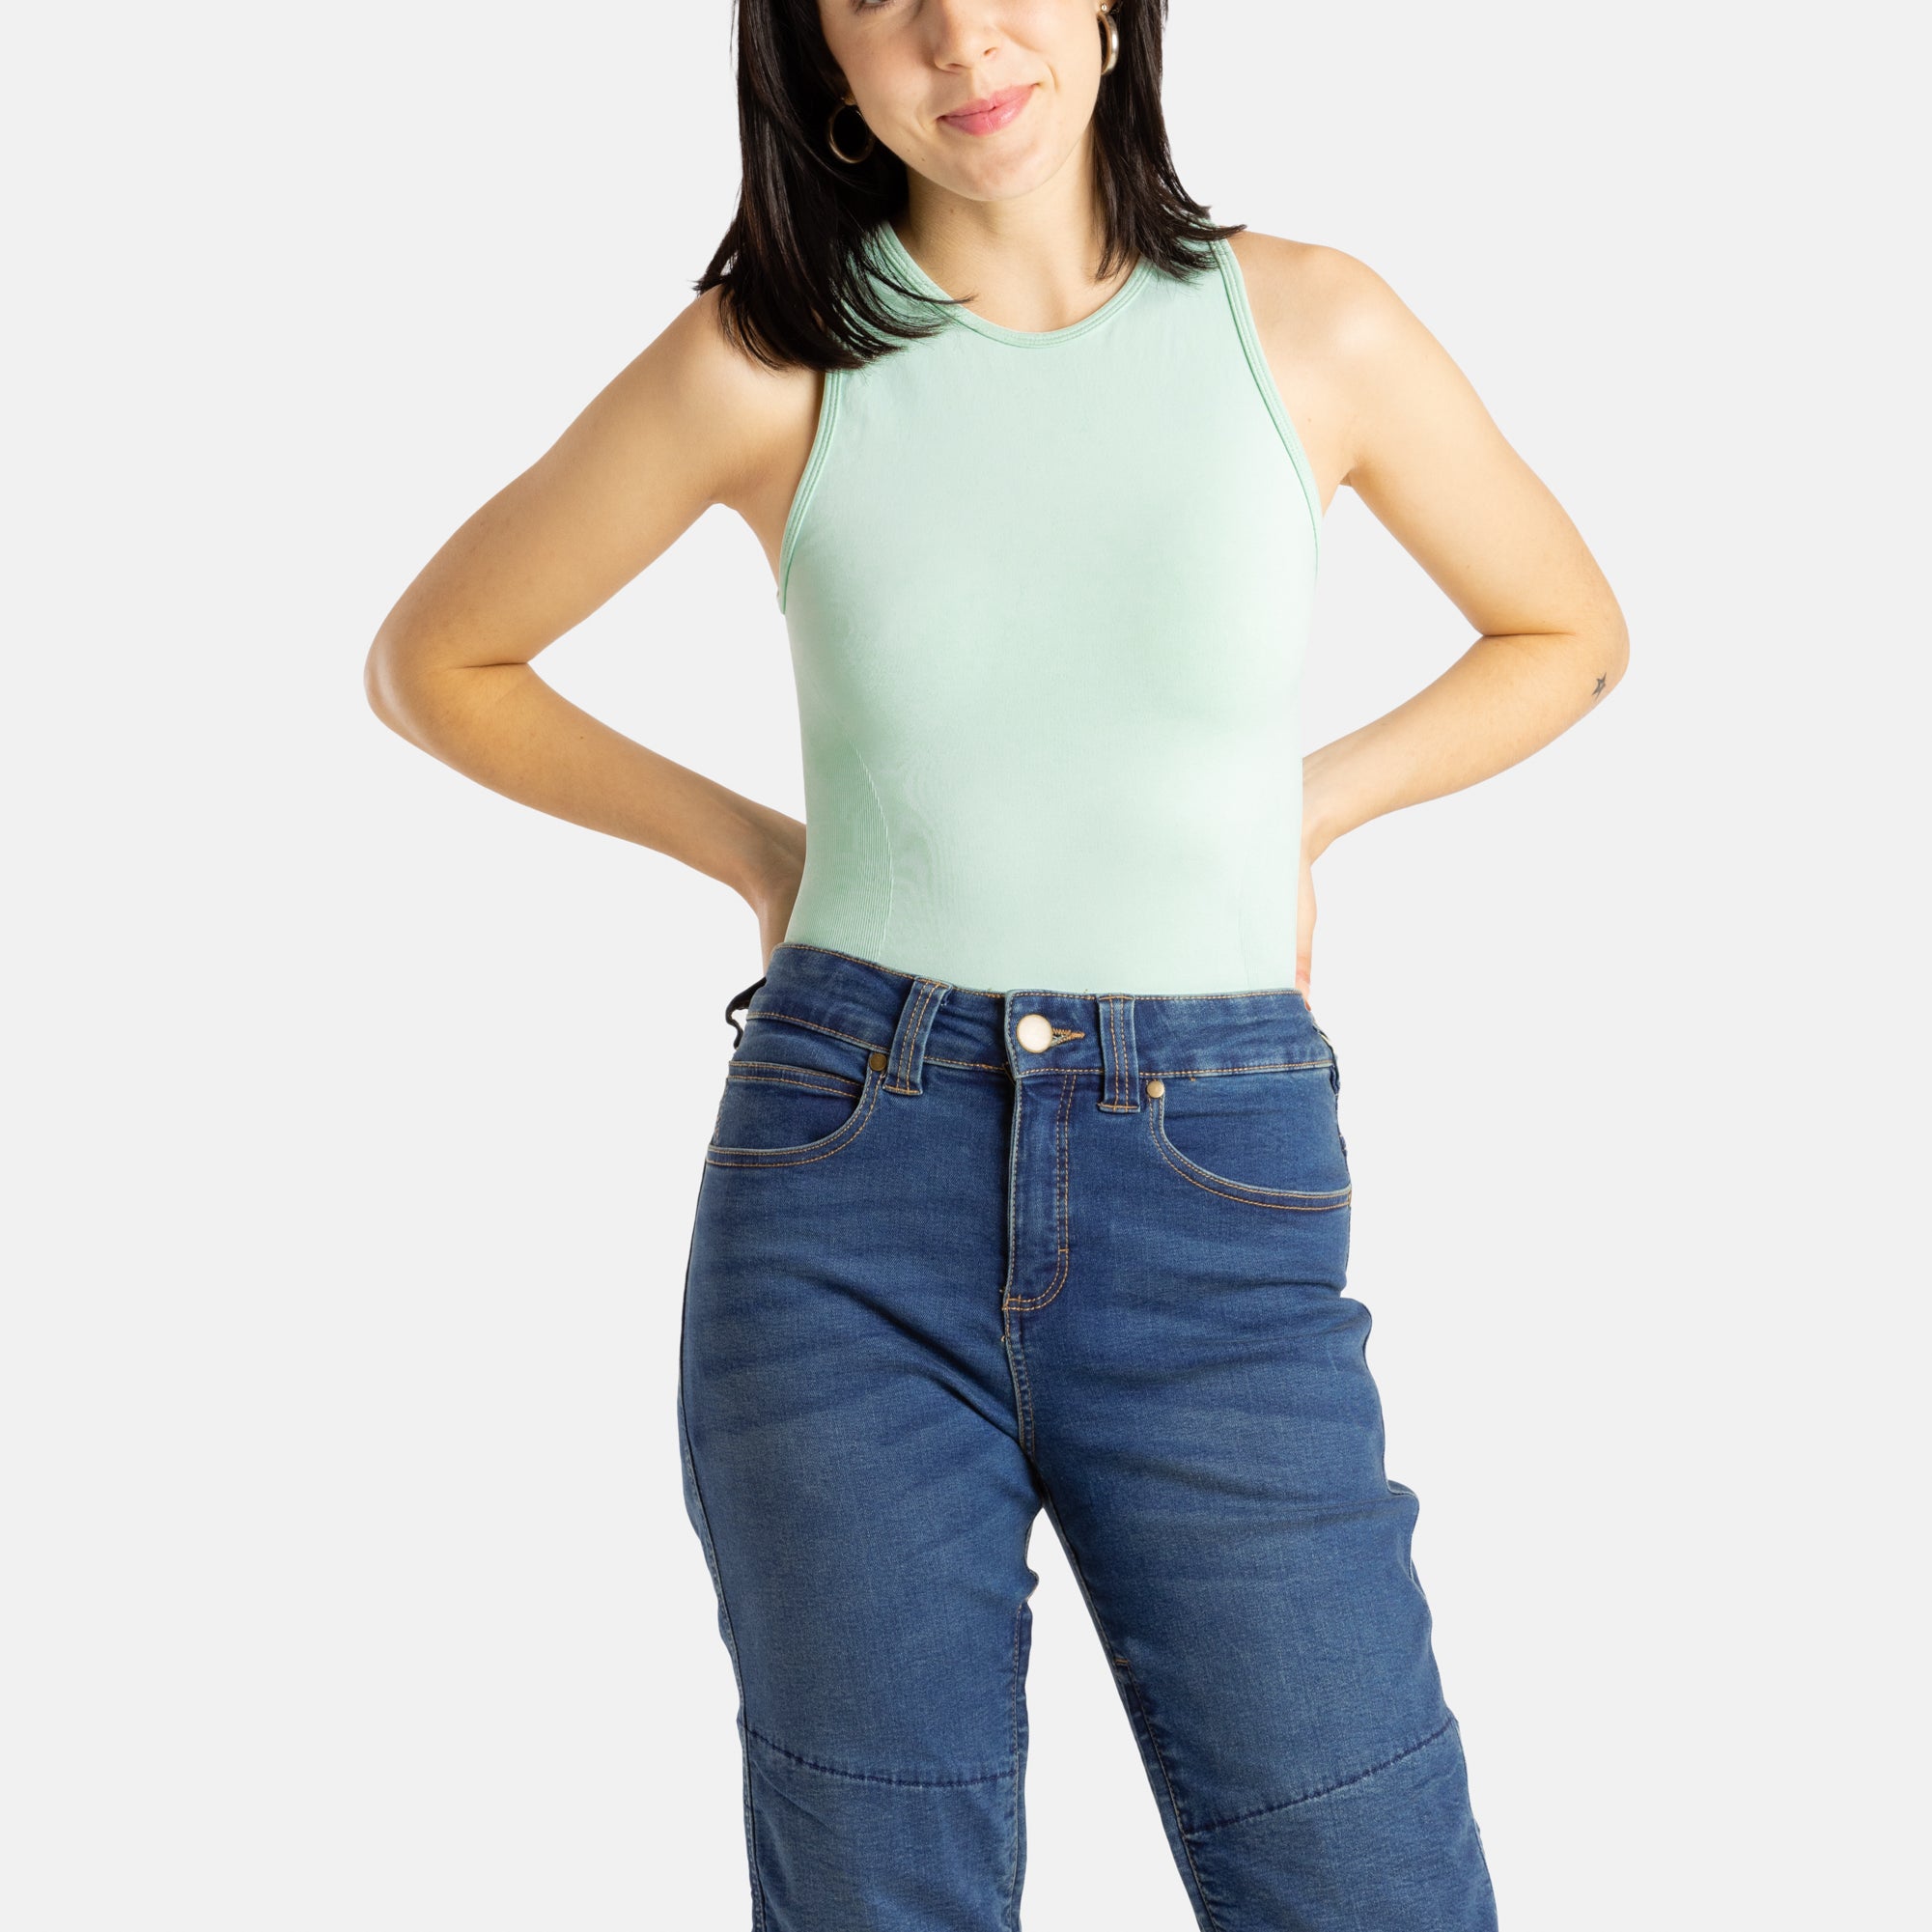 A white woman with long black hair and hoop earrings wears a sea form (Very light green) tank top and denim jeans.